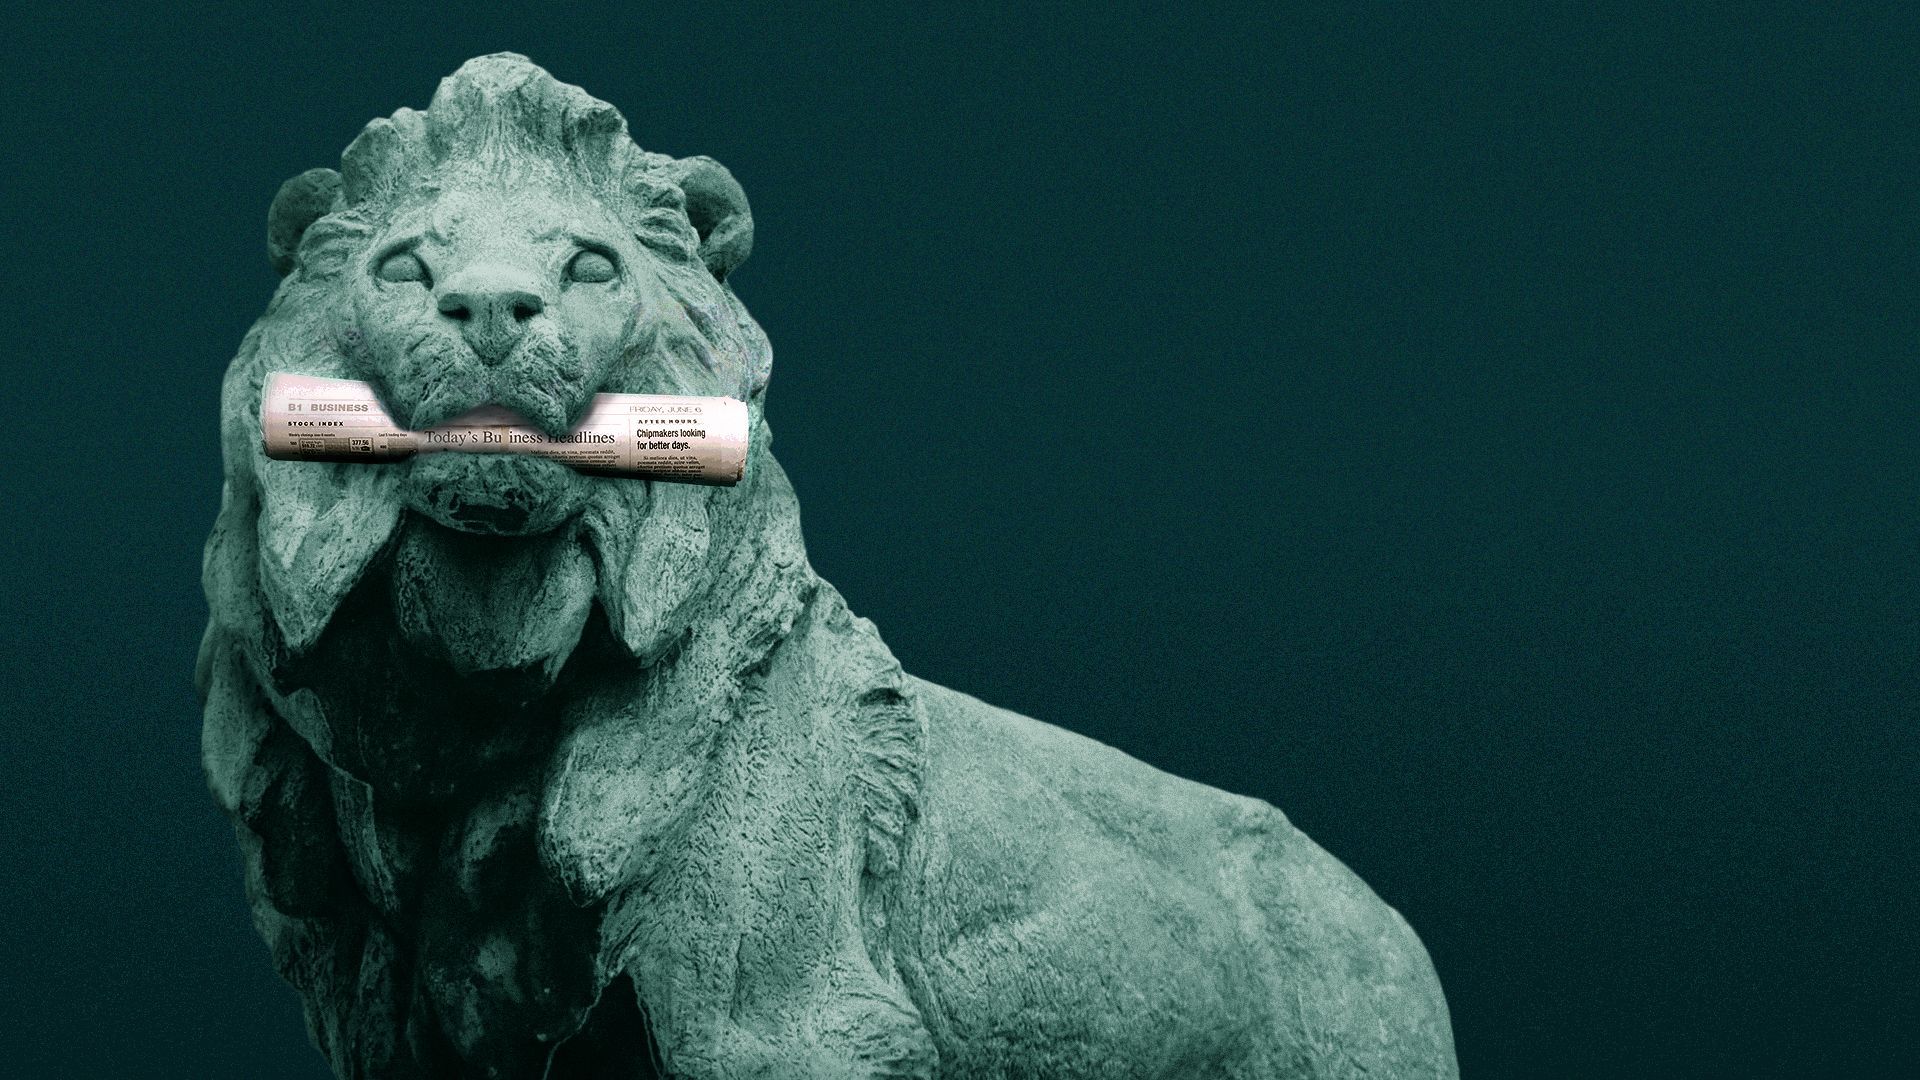 Illustration of the Art Institute of Chicago's Lion statue holding a newspaper in its mouth.